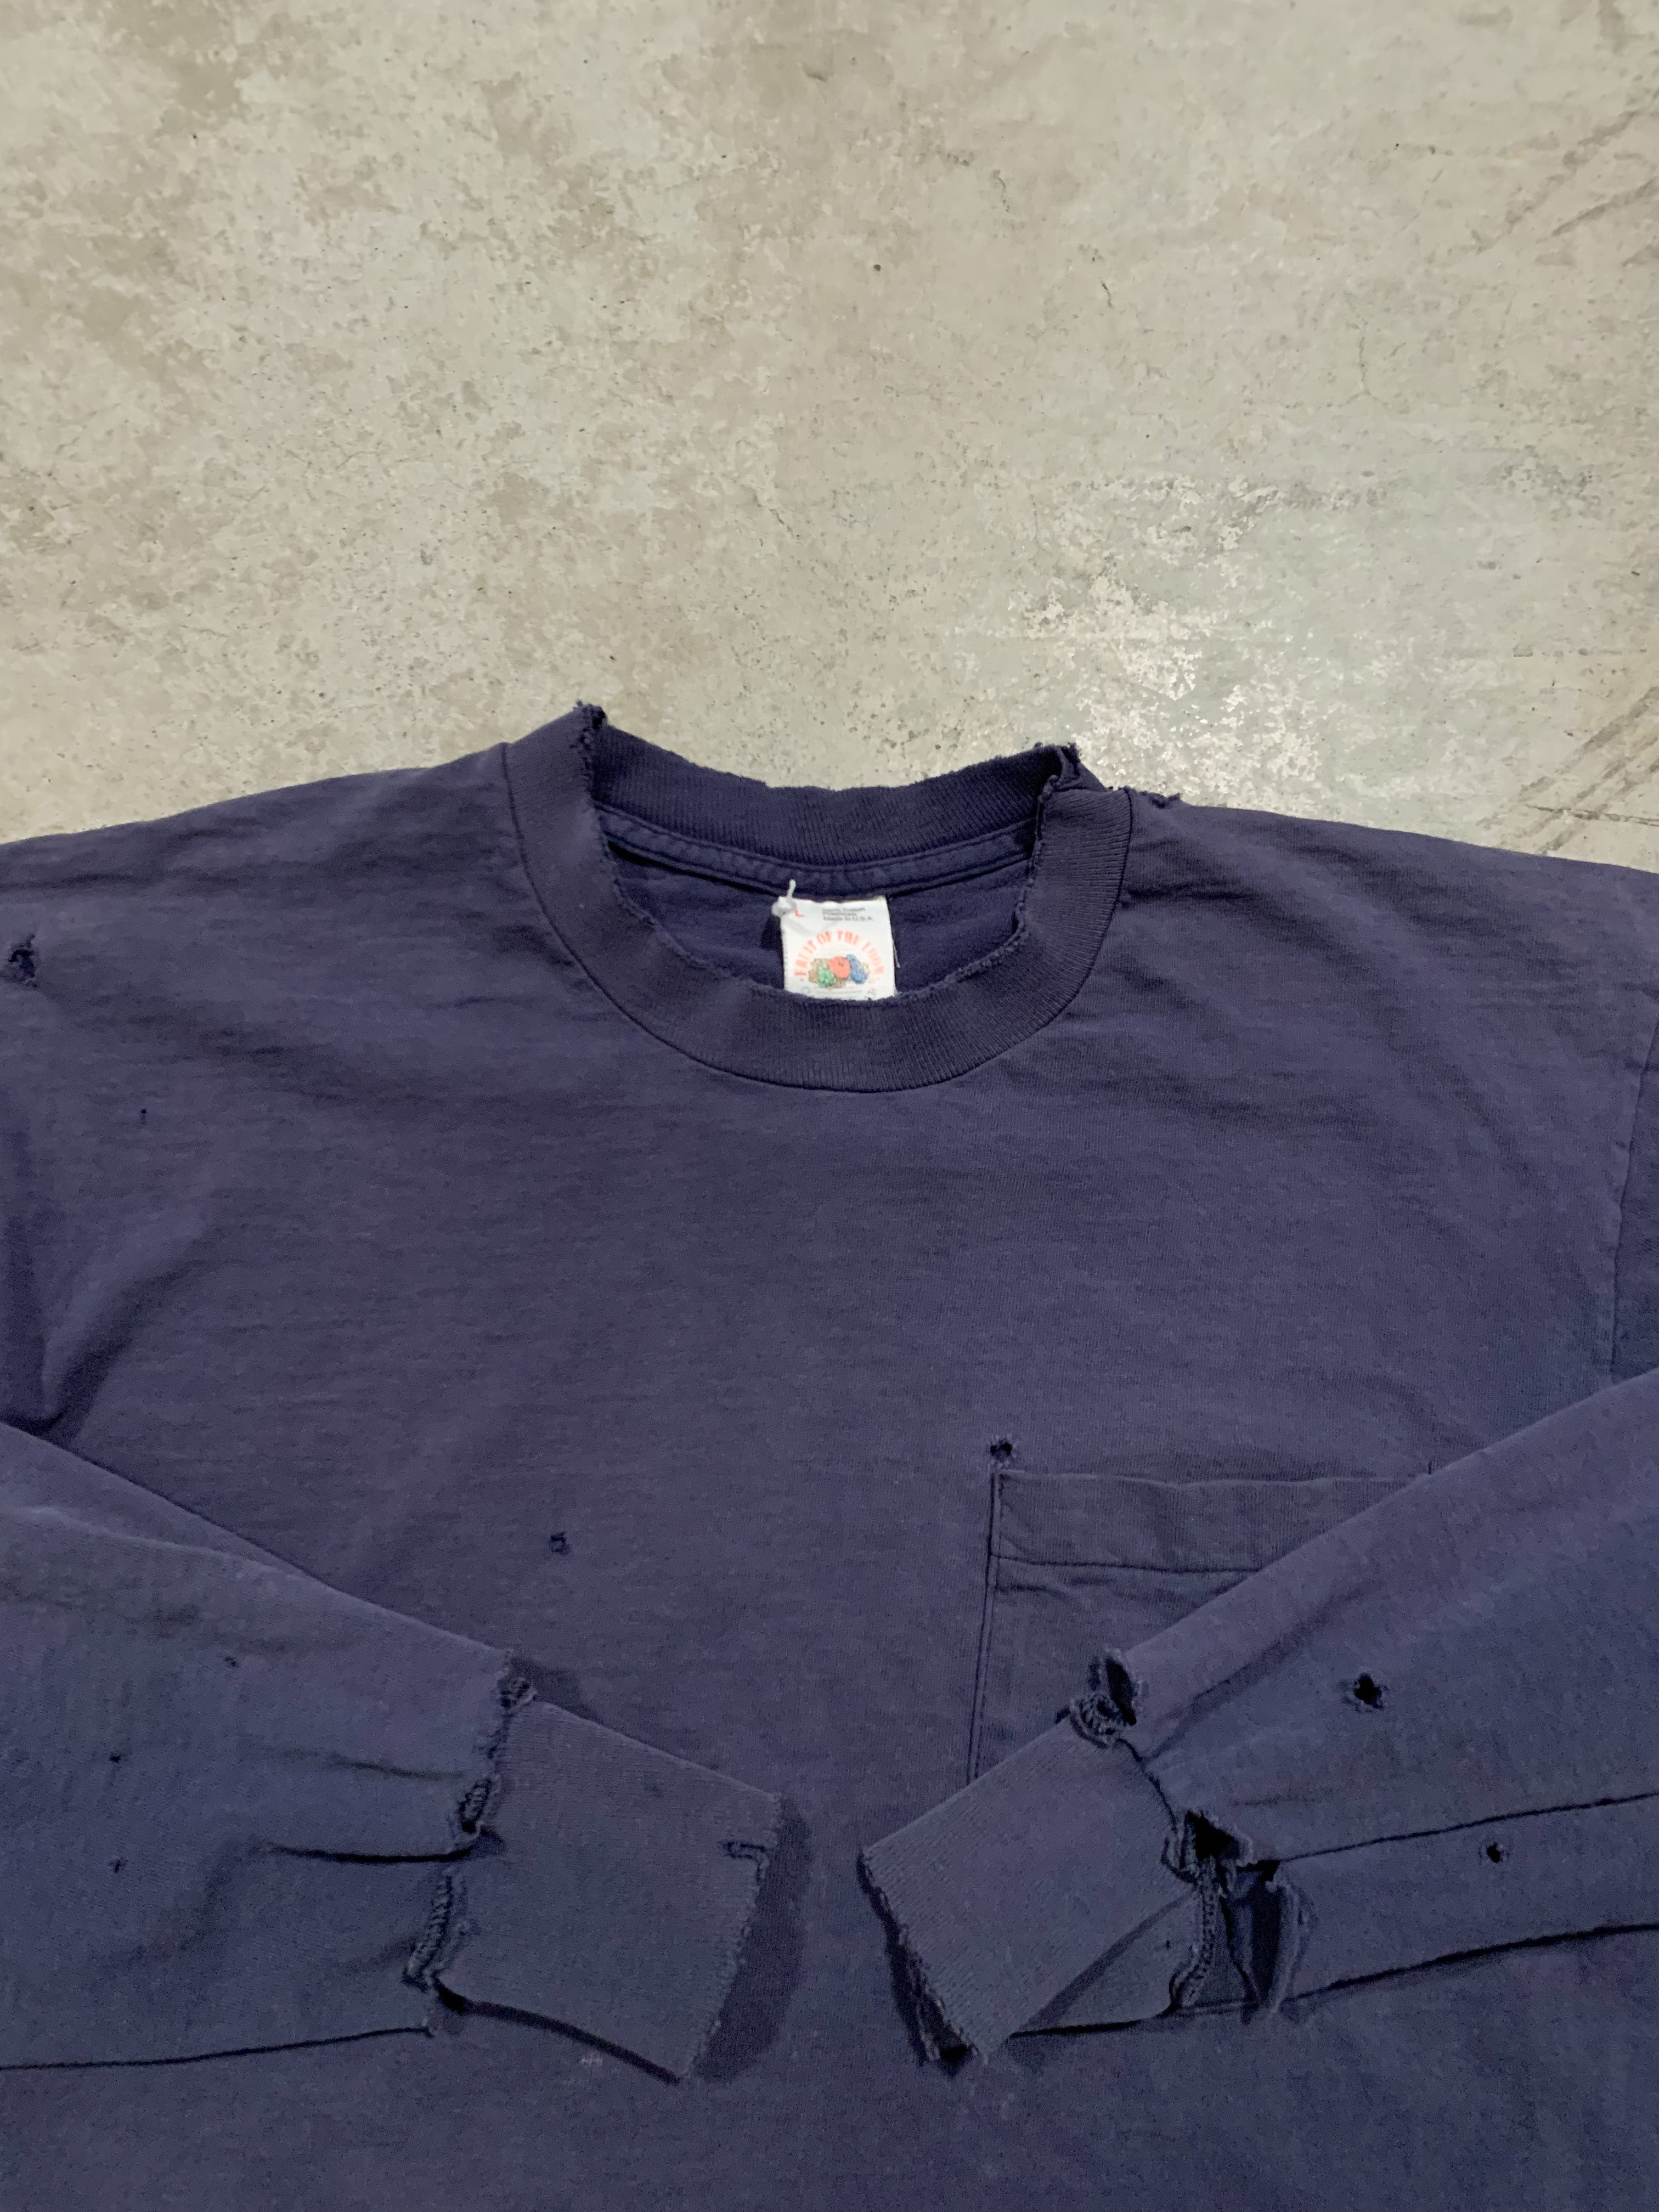 1990s Thrashed Faded Pocket L/S Tee [M]